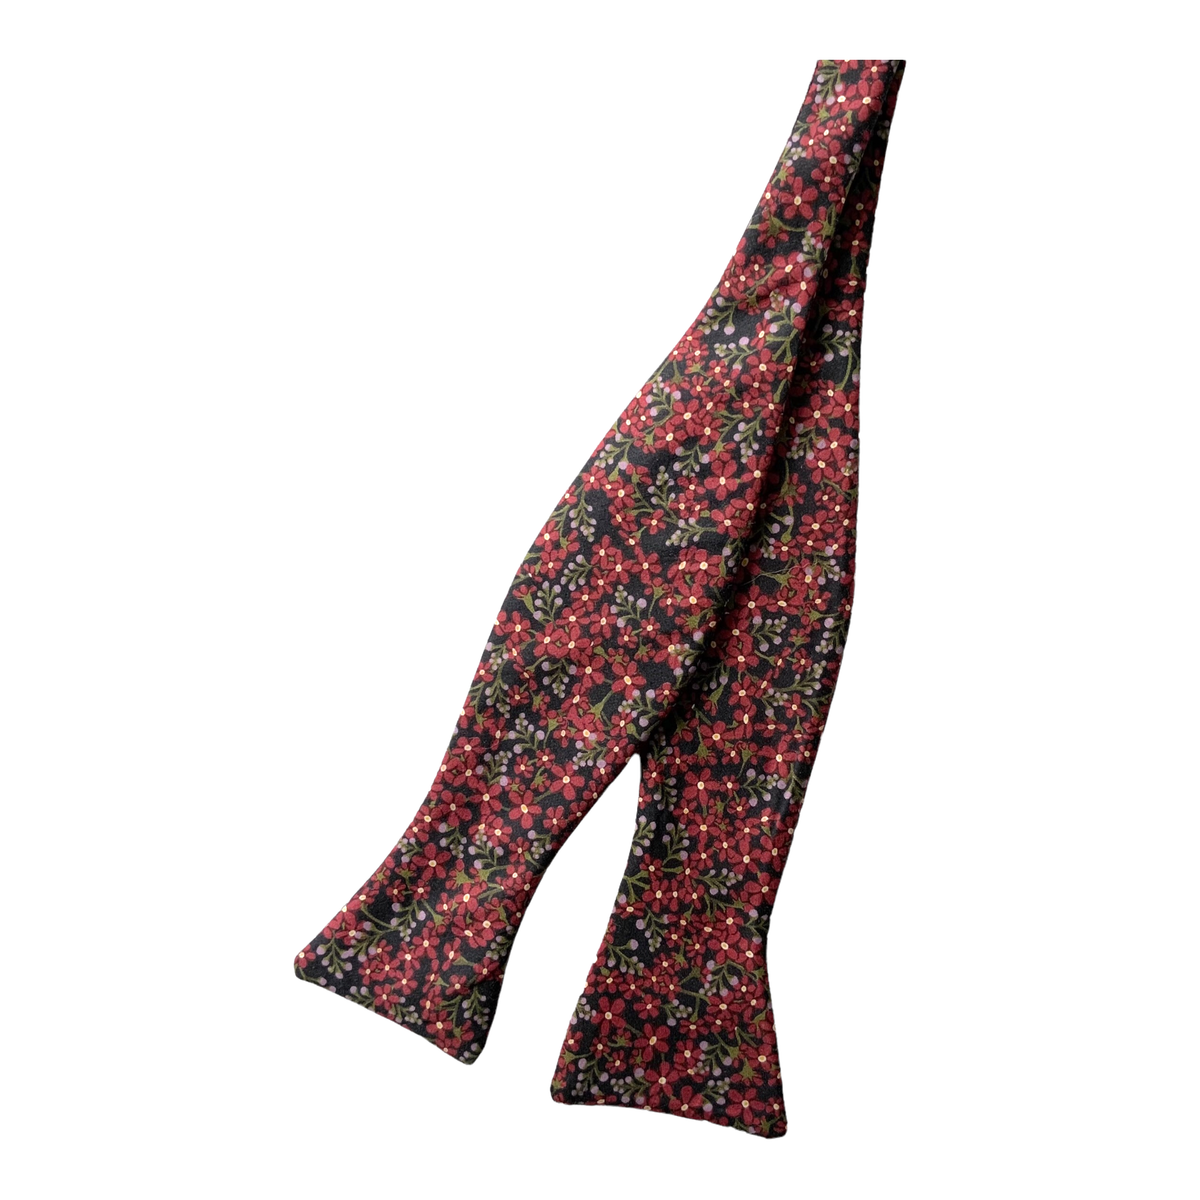 LIBERTY OF LONDON STAR ANISE BOW TIE